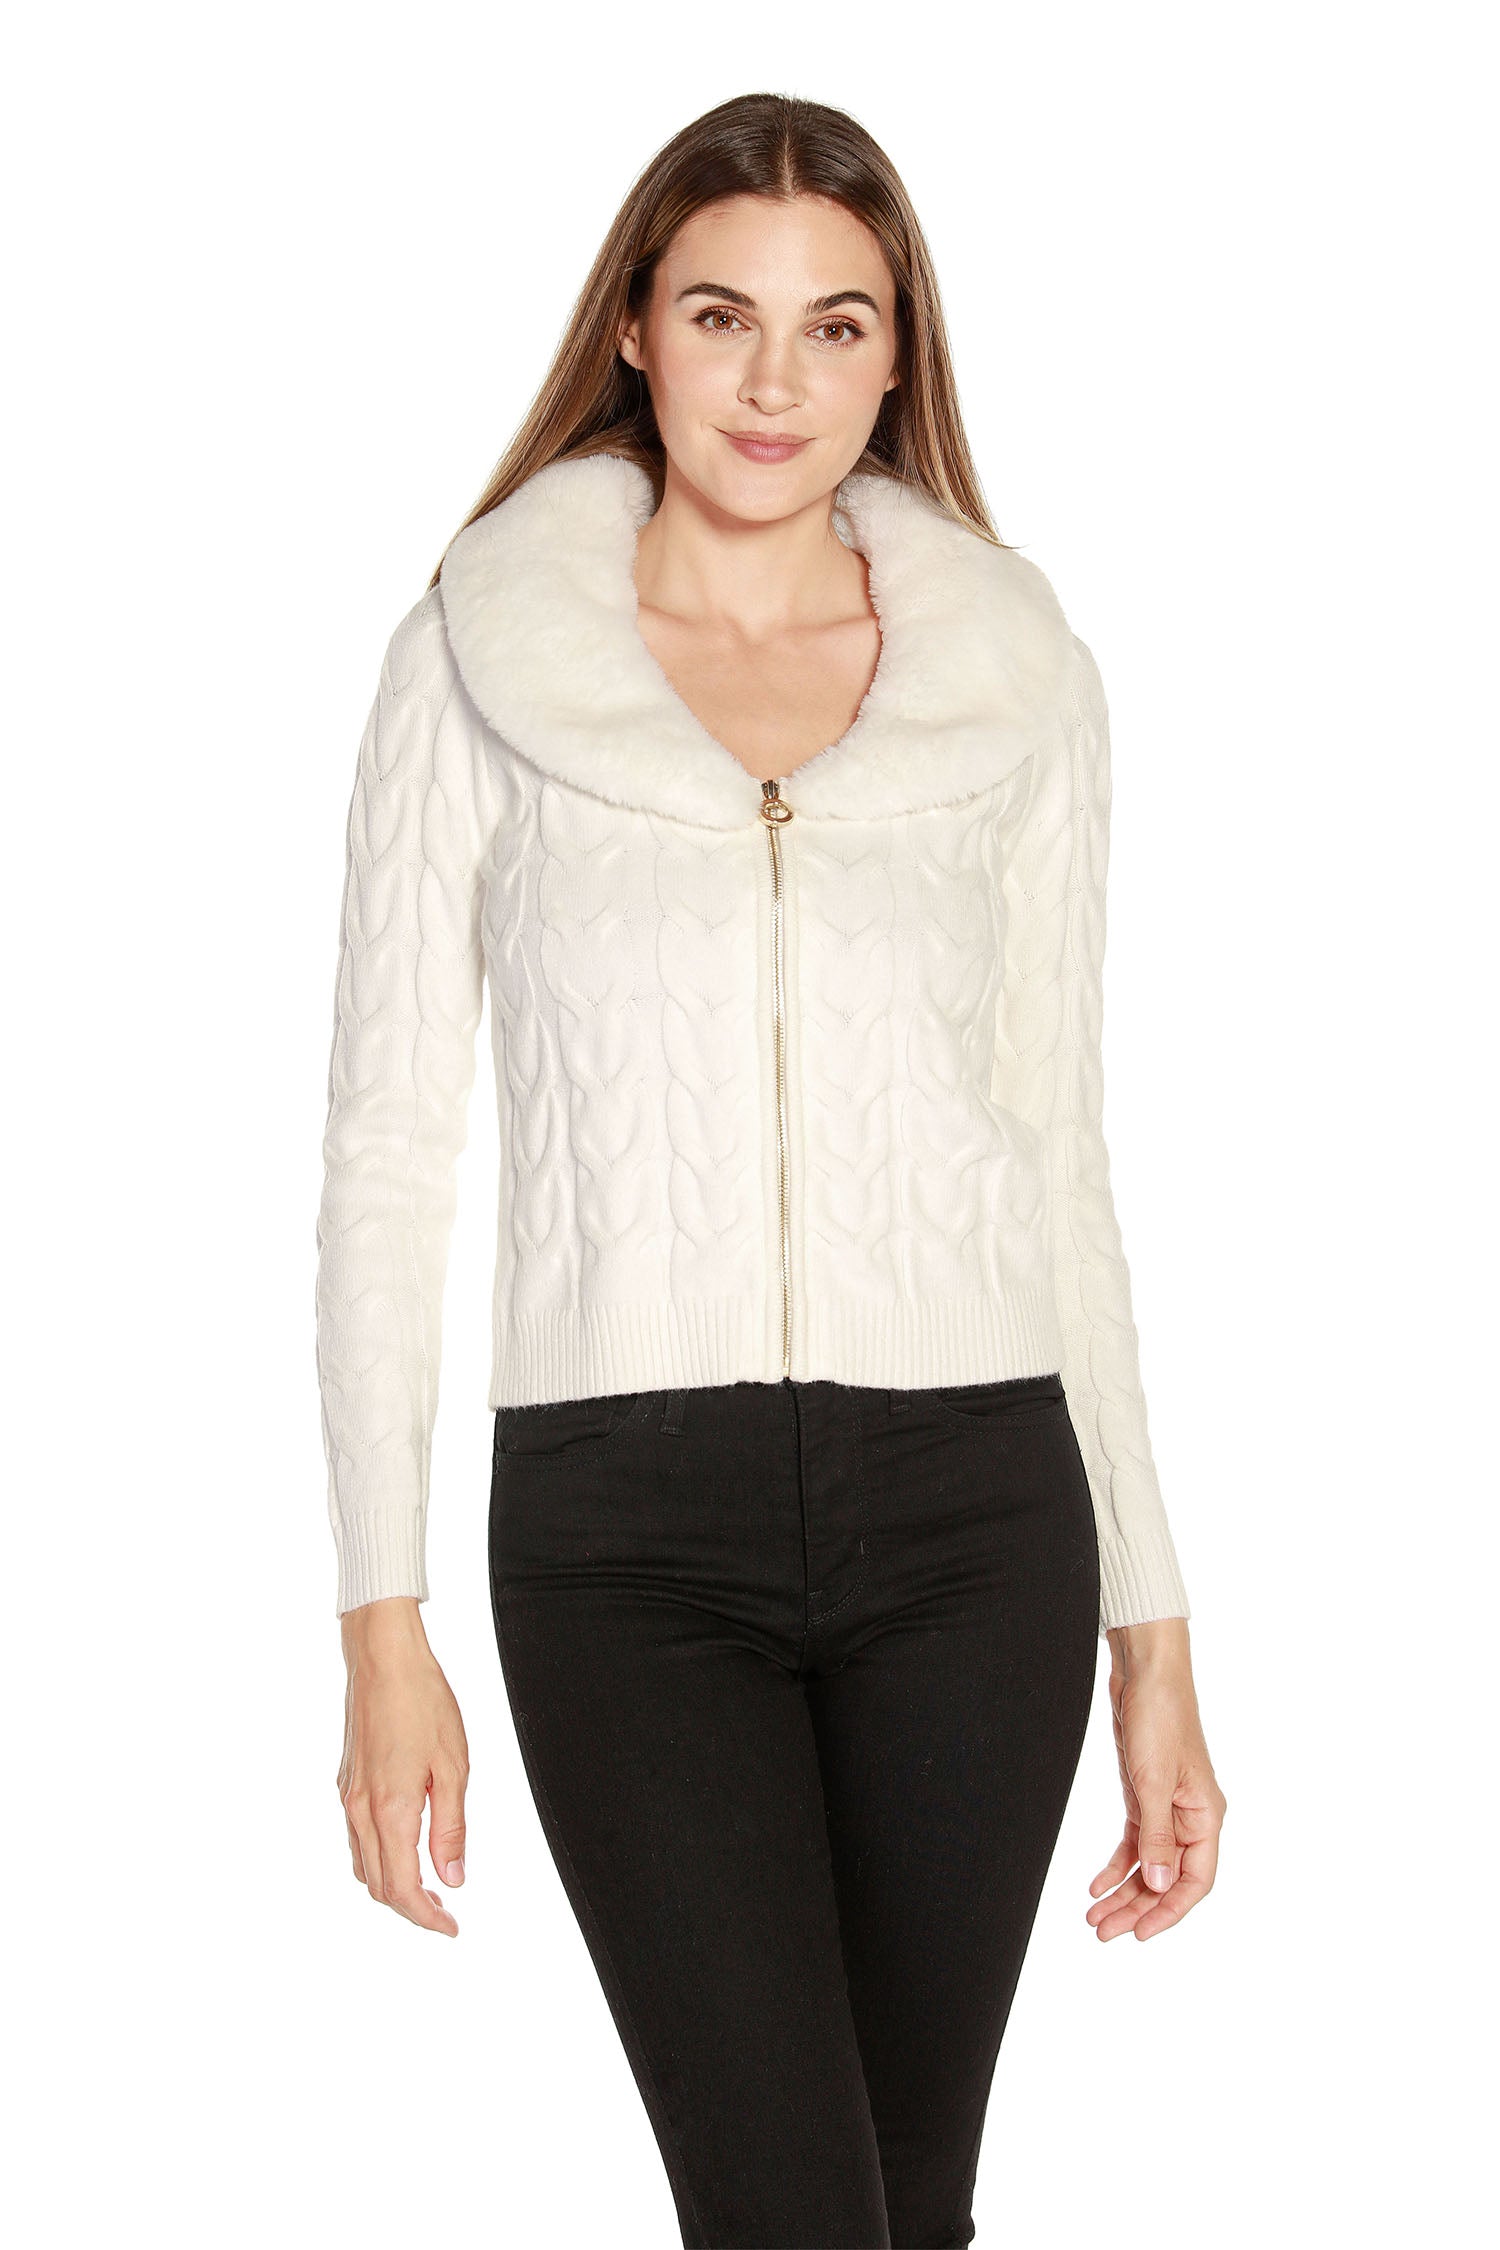 Women's Zip Front Cable Knit Cardigan Sweater with Faux Fur Collar